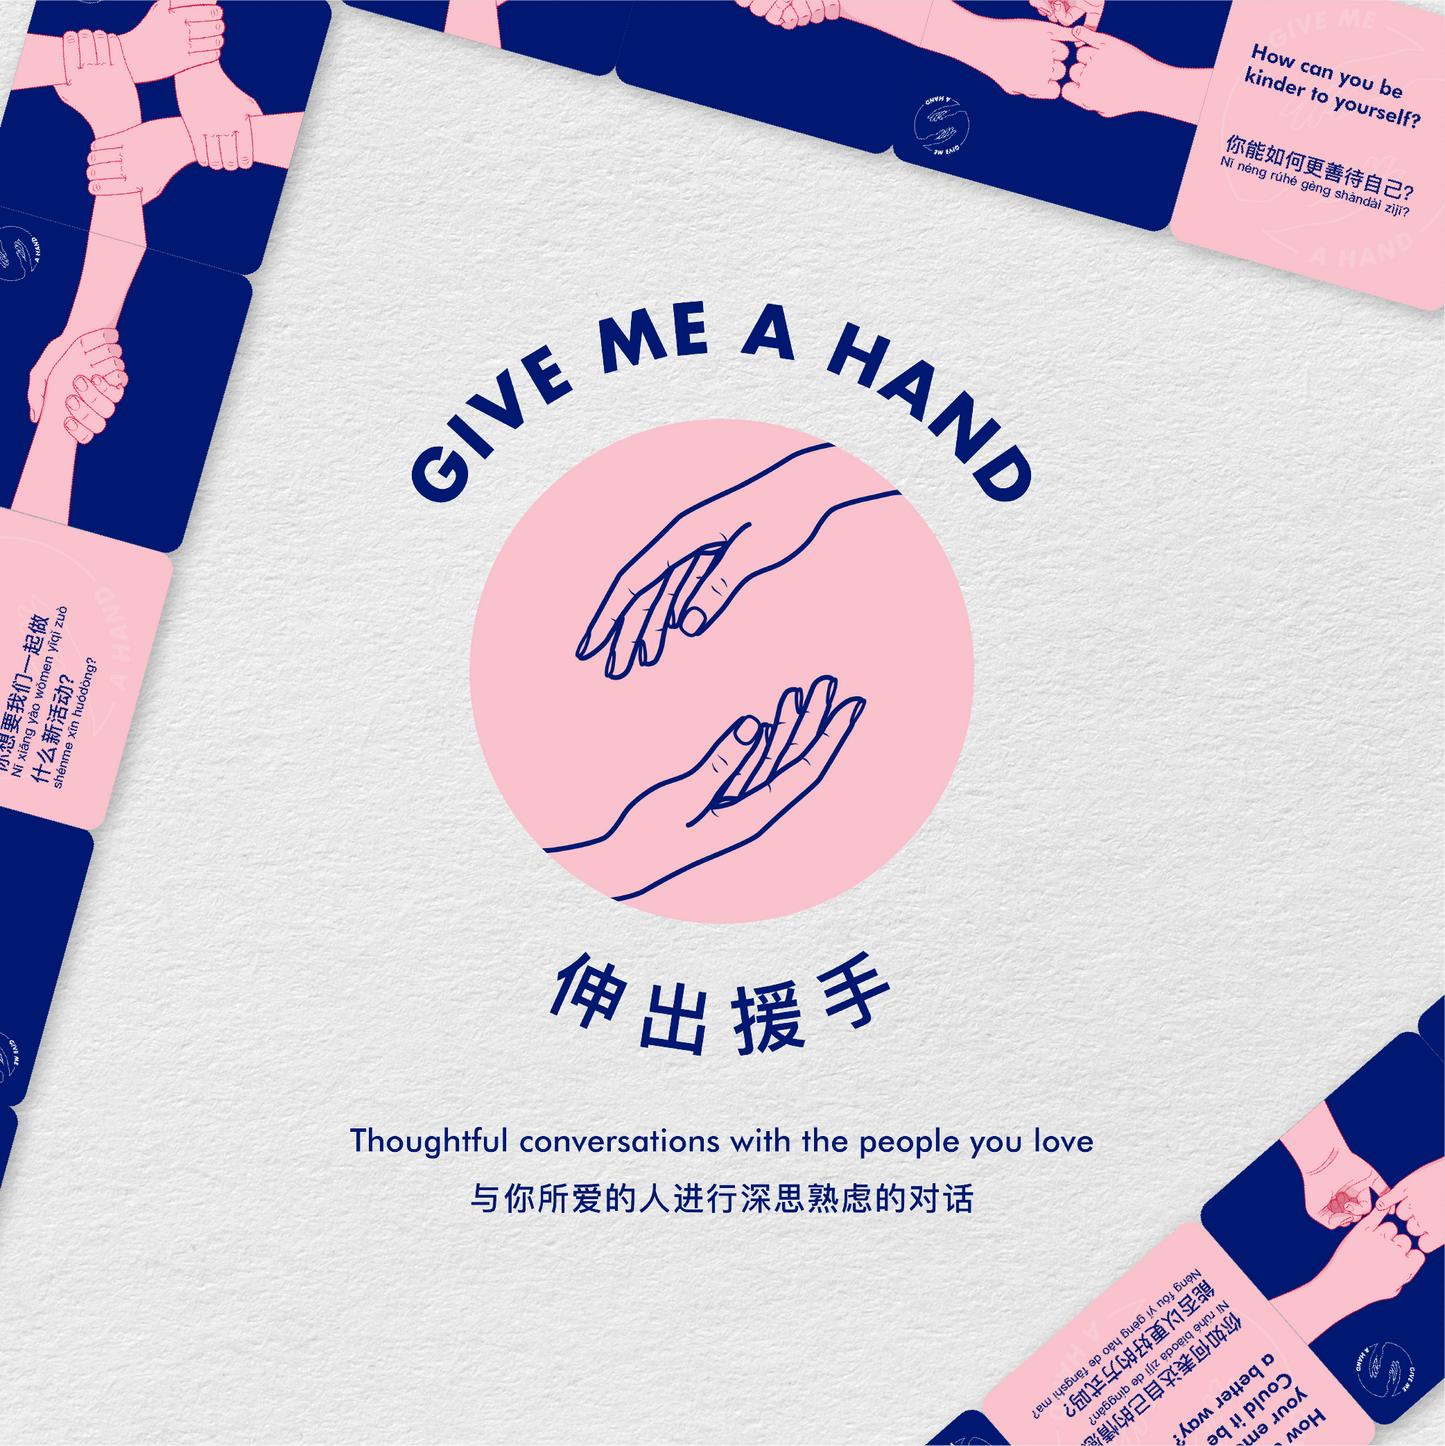 Give Me A Hand: Bilingual Edition (English + Simplified Chinese)